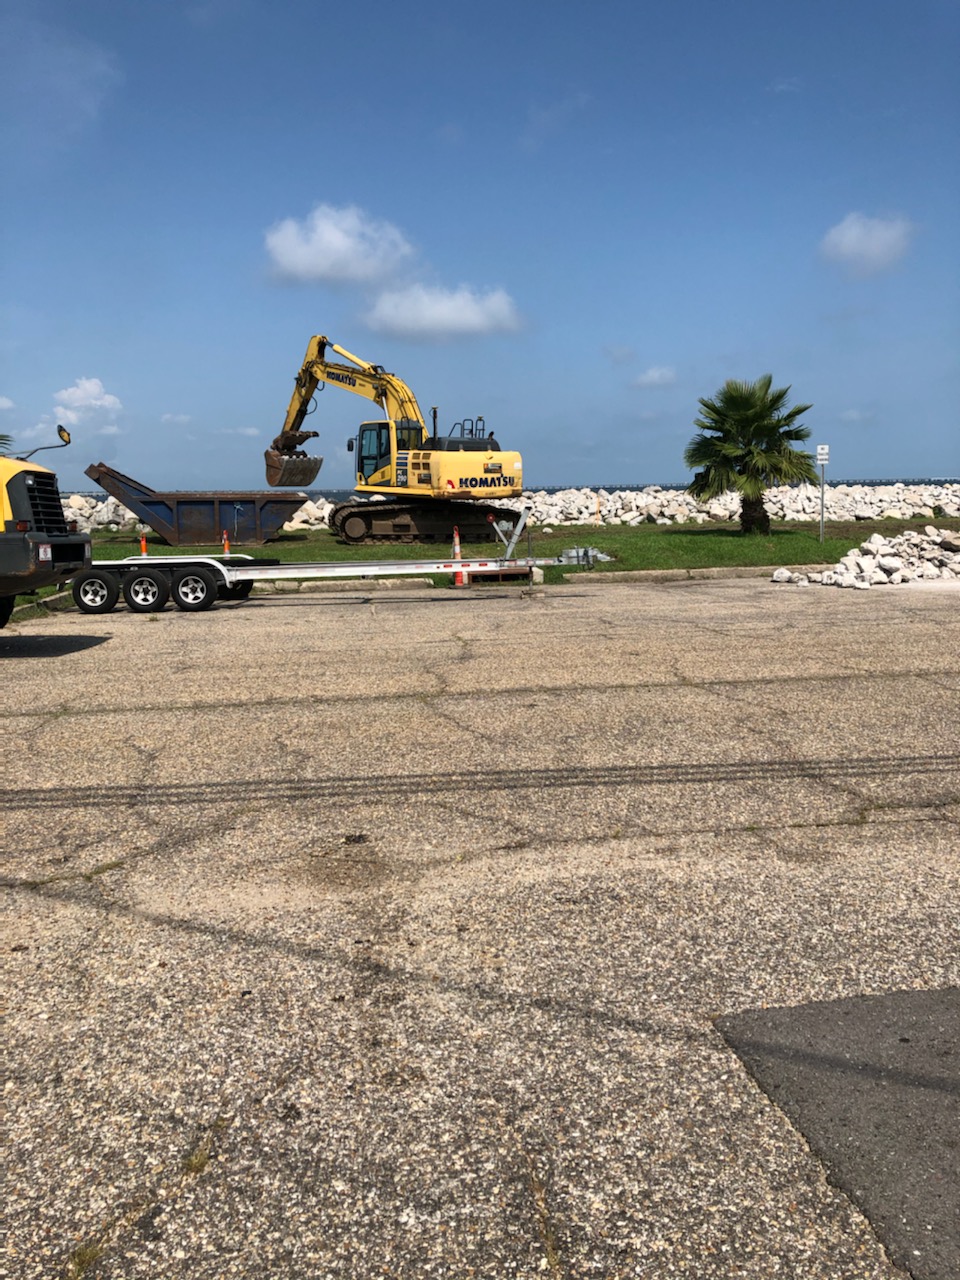 PARKING LOT UPGRADES CONTINUE ON THE BREAKWATER DRIVE IMPROVEMENT PROJECT